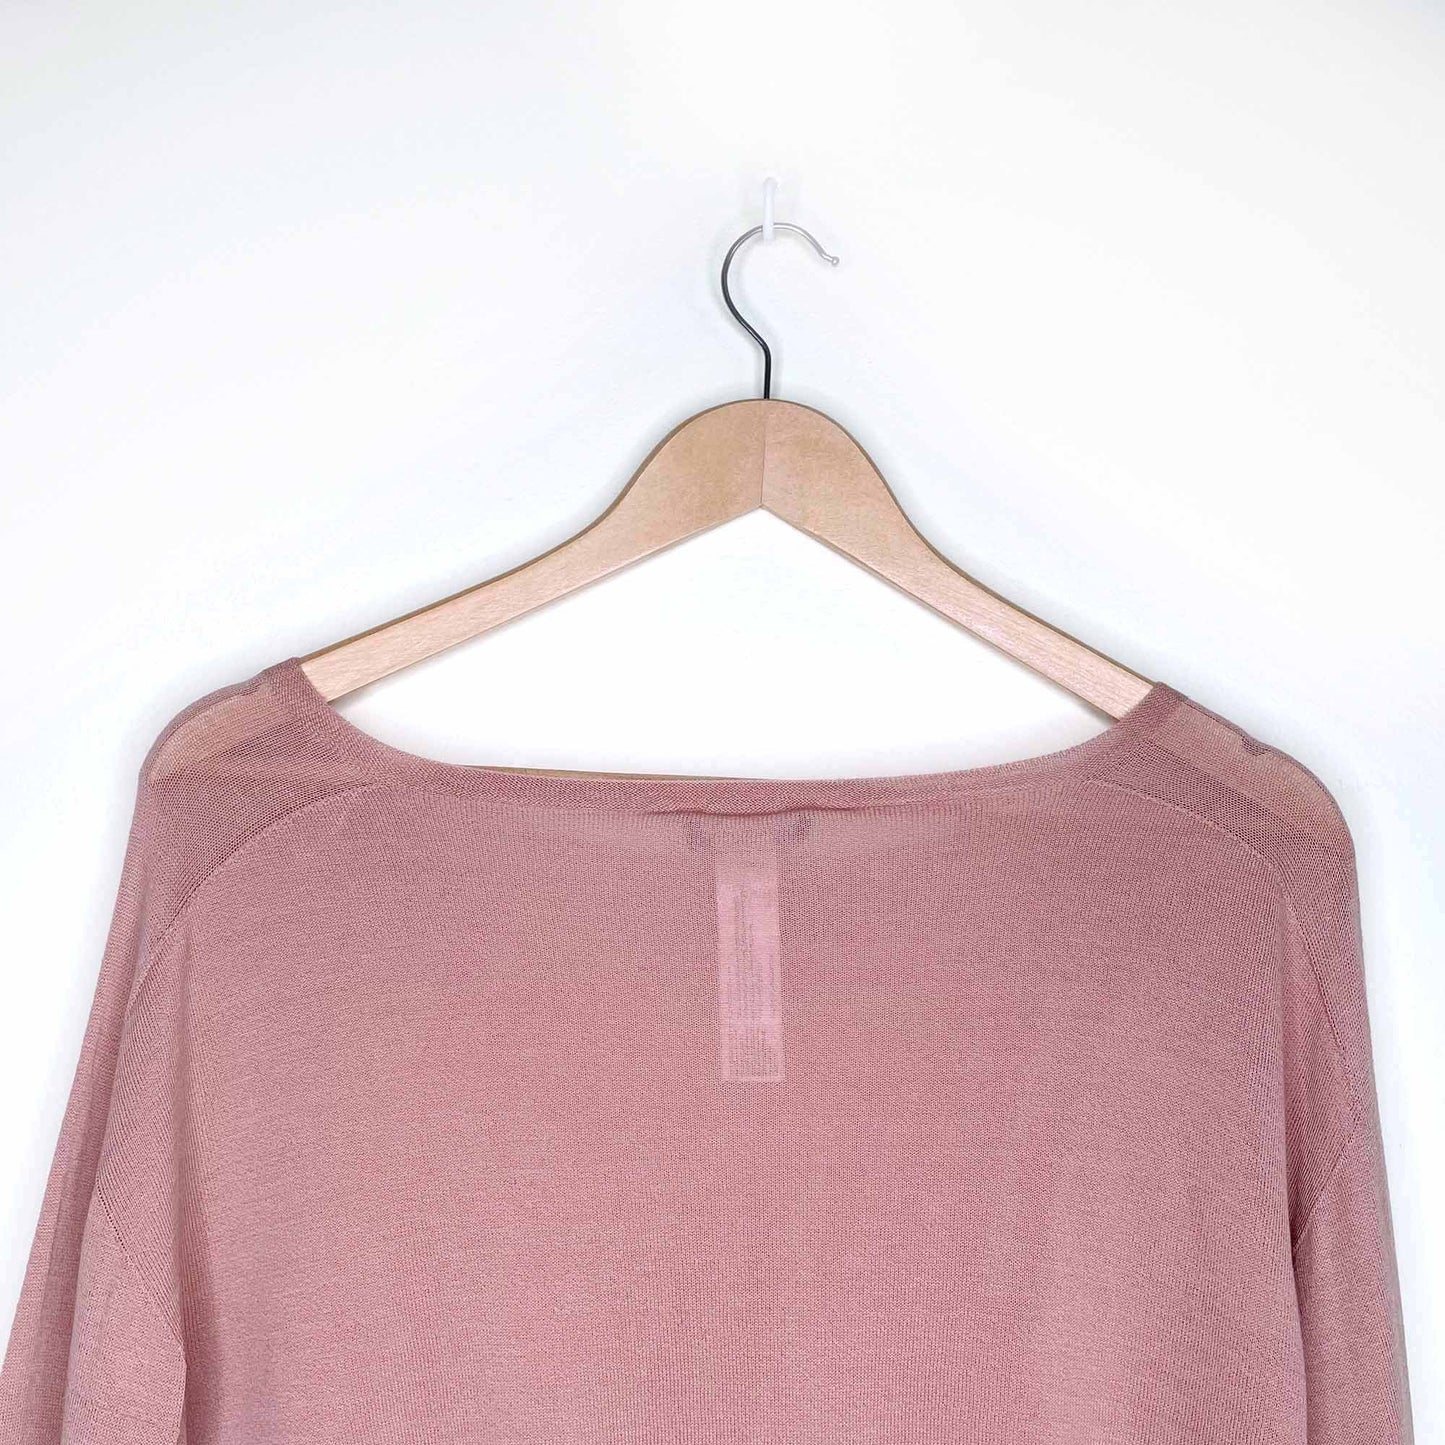 eileen fisher lightweight tencel knit sweater with bell sleeves - size xs